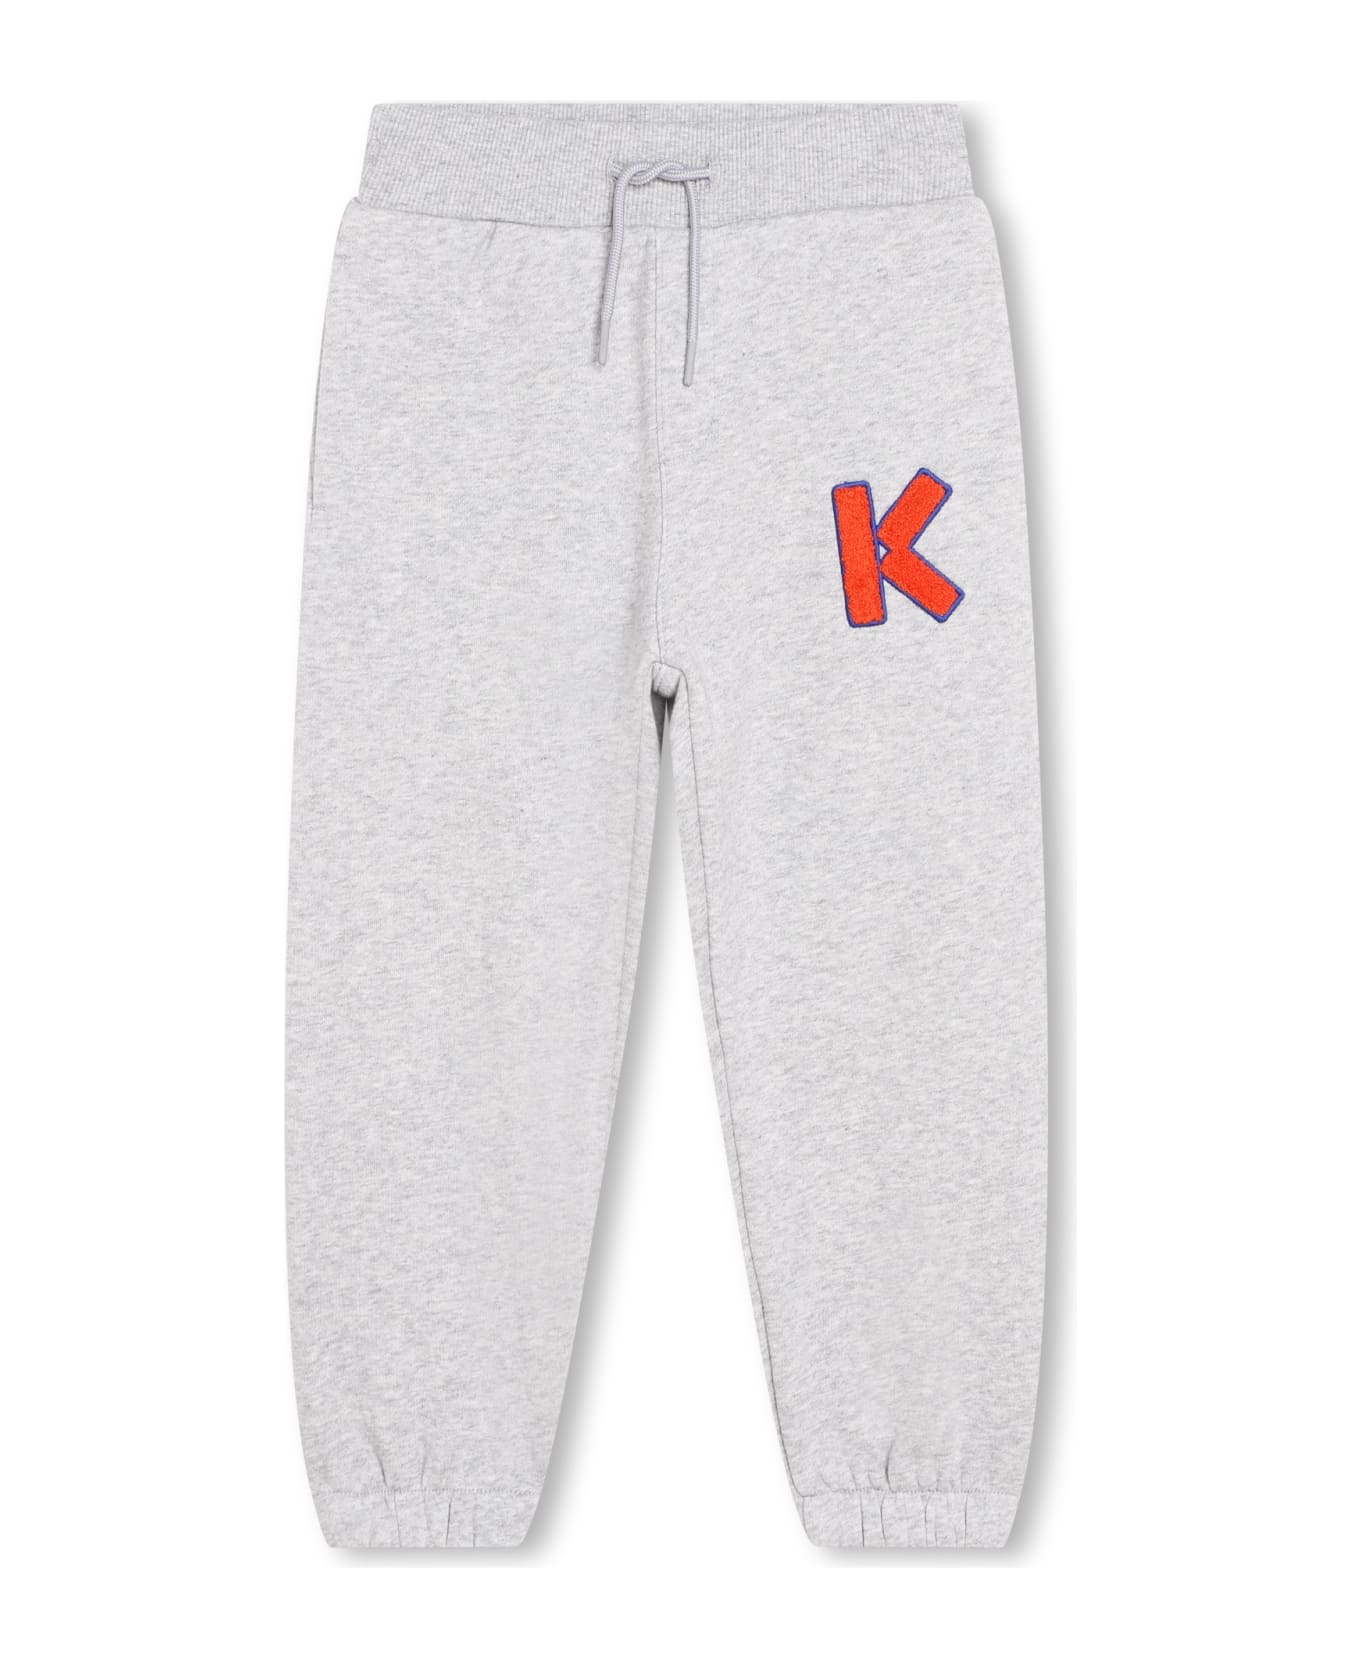 Kenzo Kids Sports Trousers With Application - Grigio Antico ボトムス